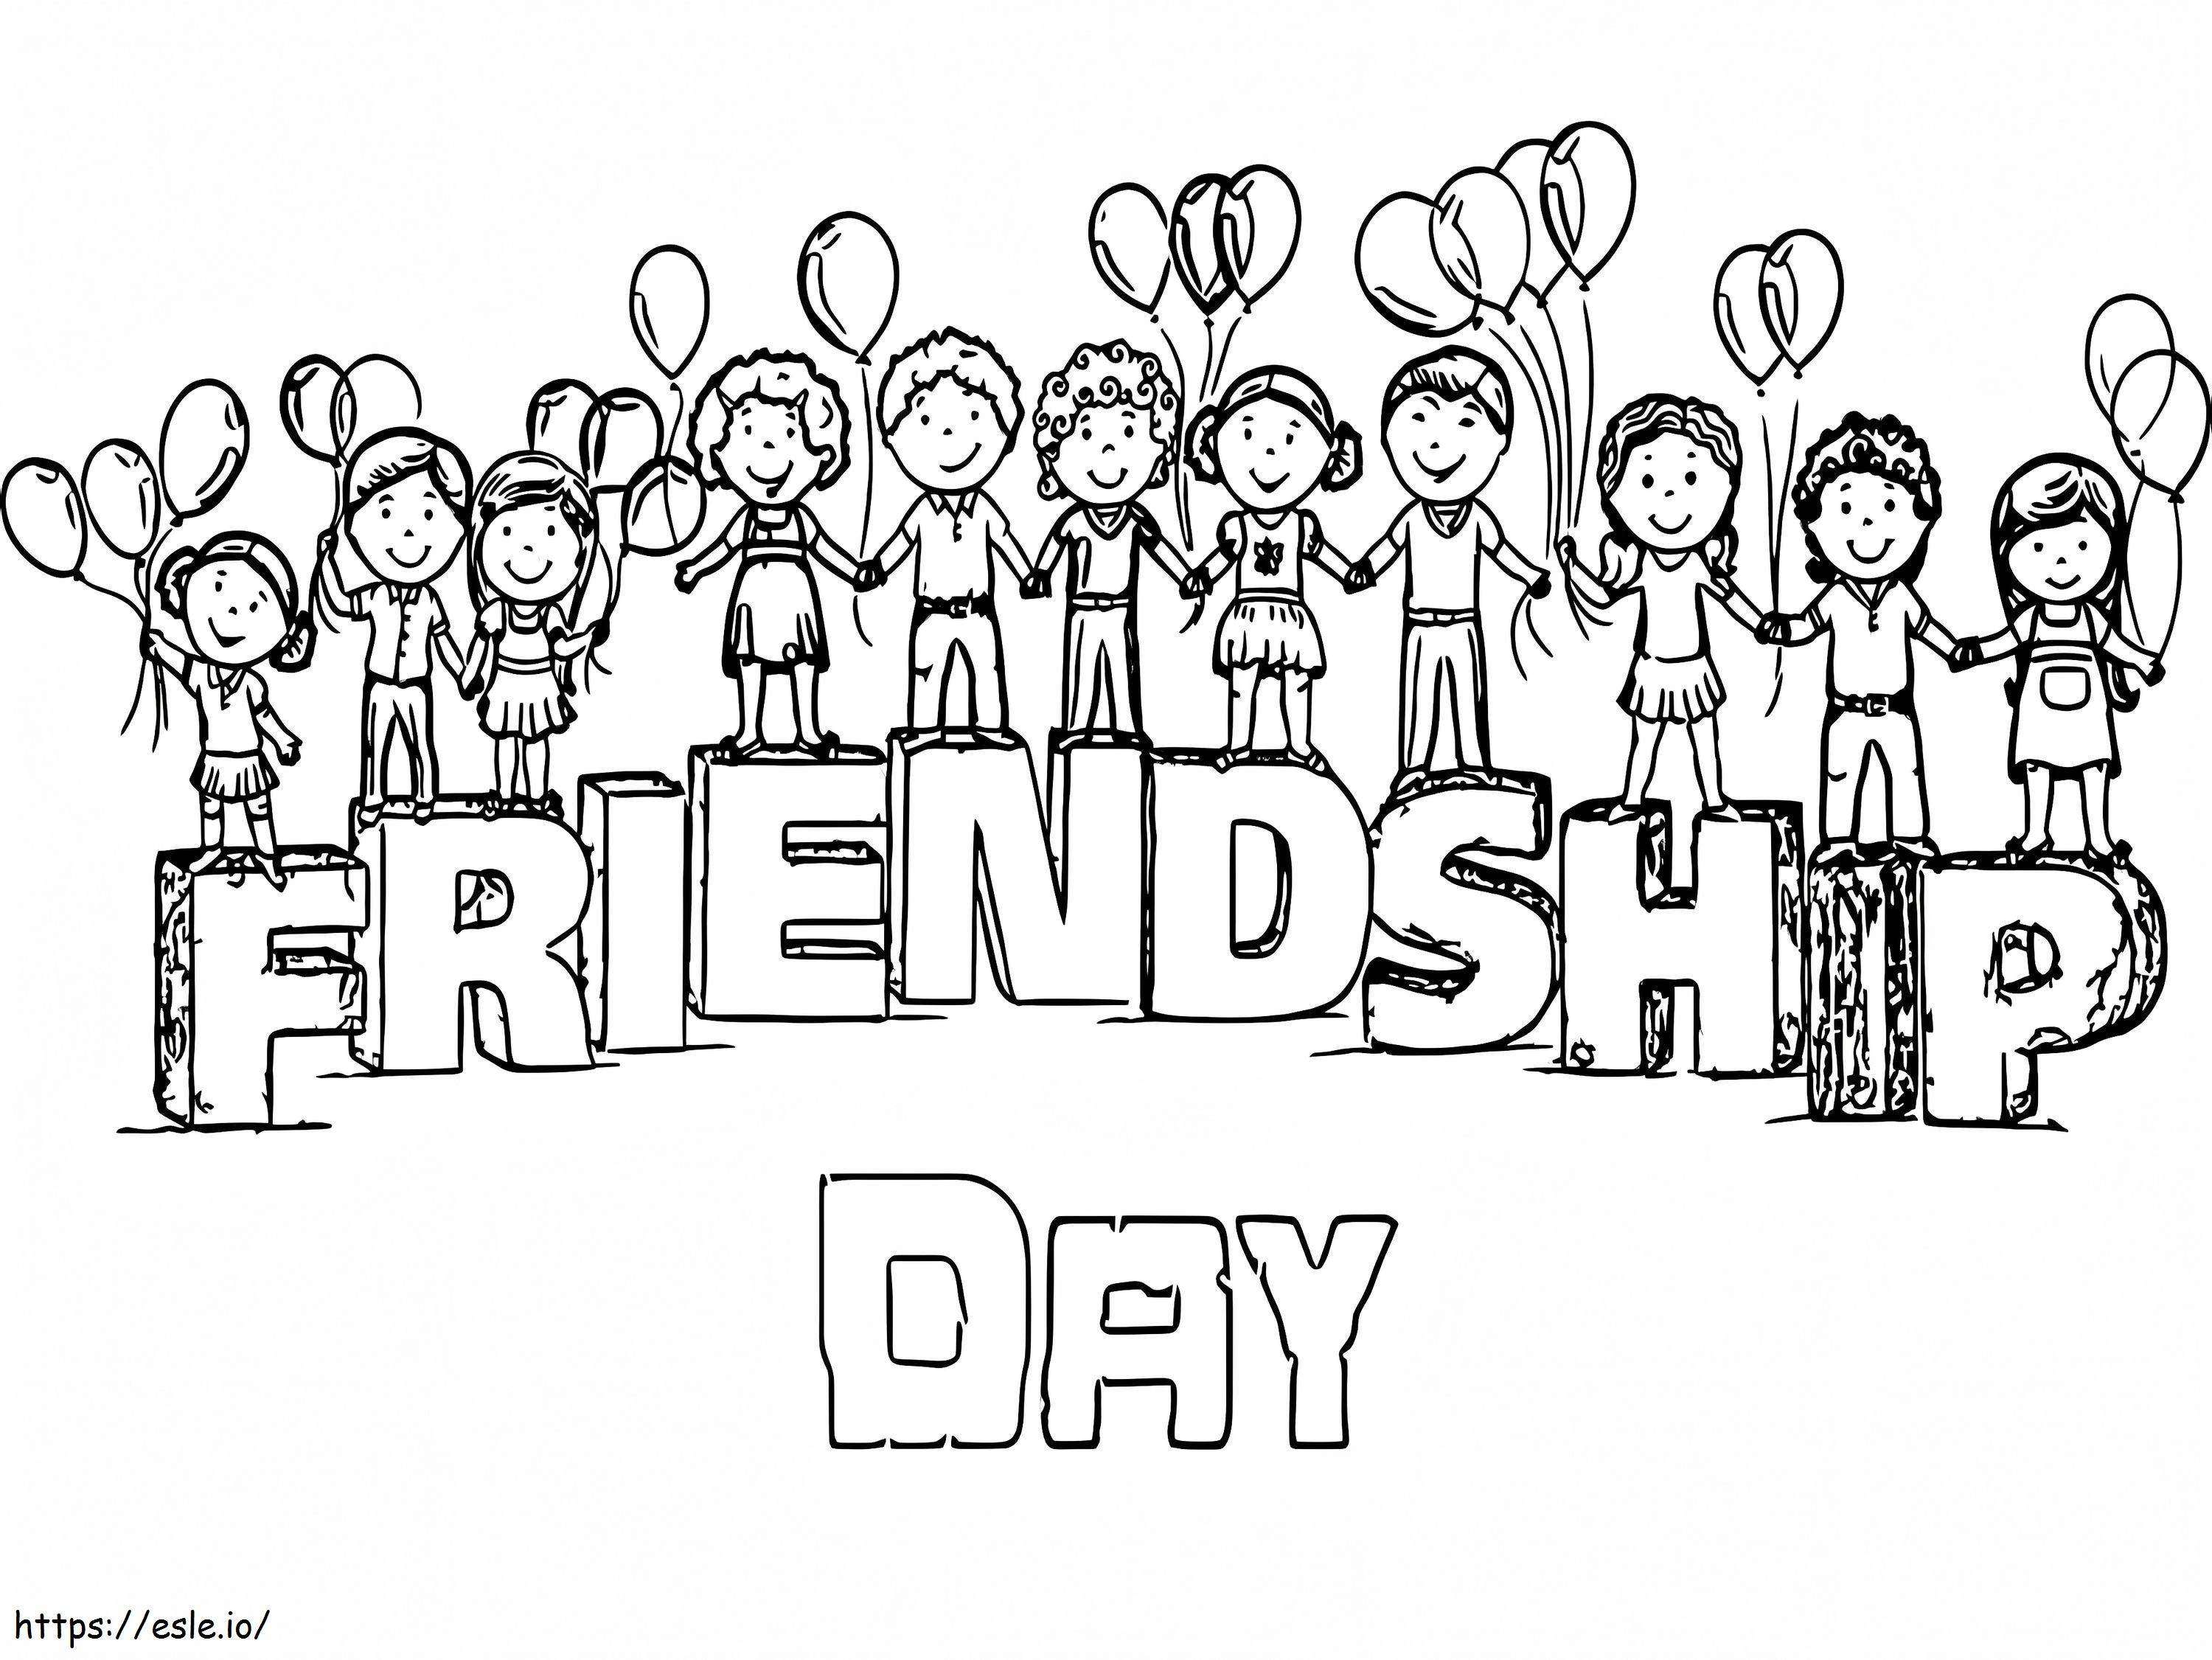 Friendship 2 coloring page